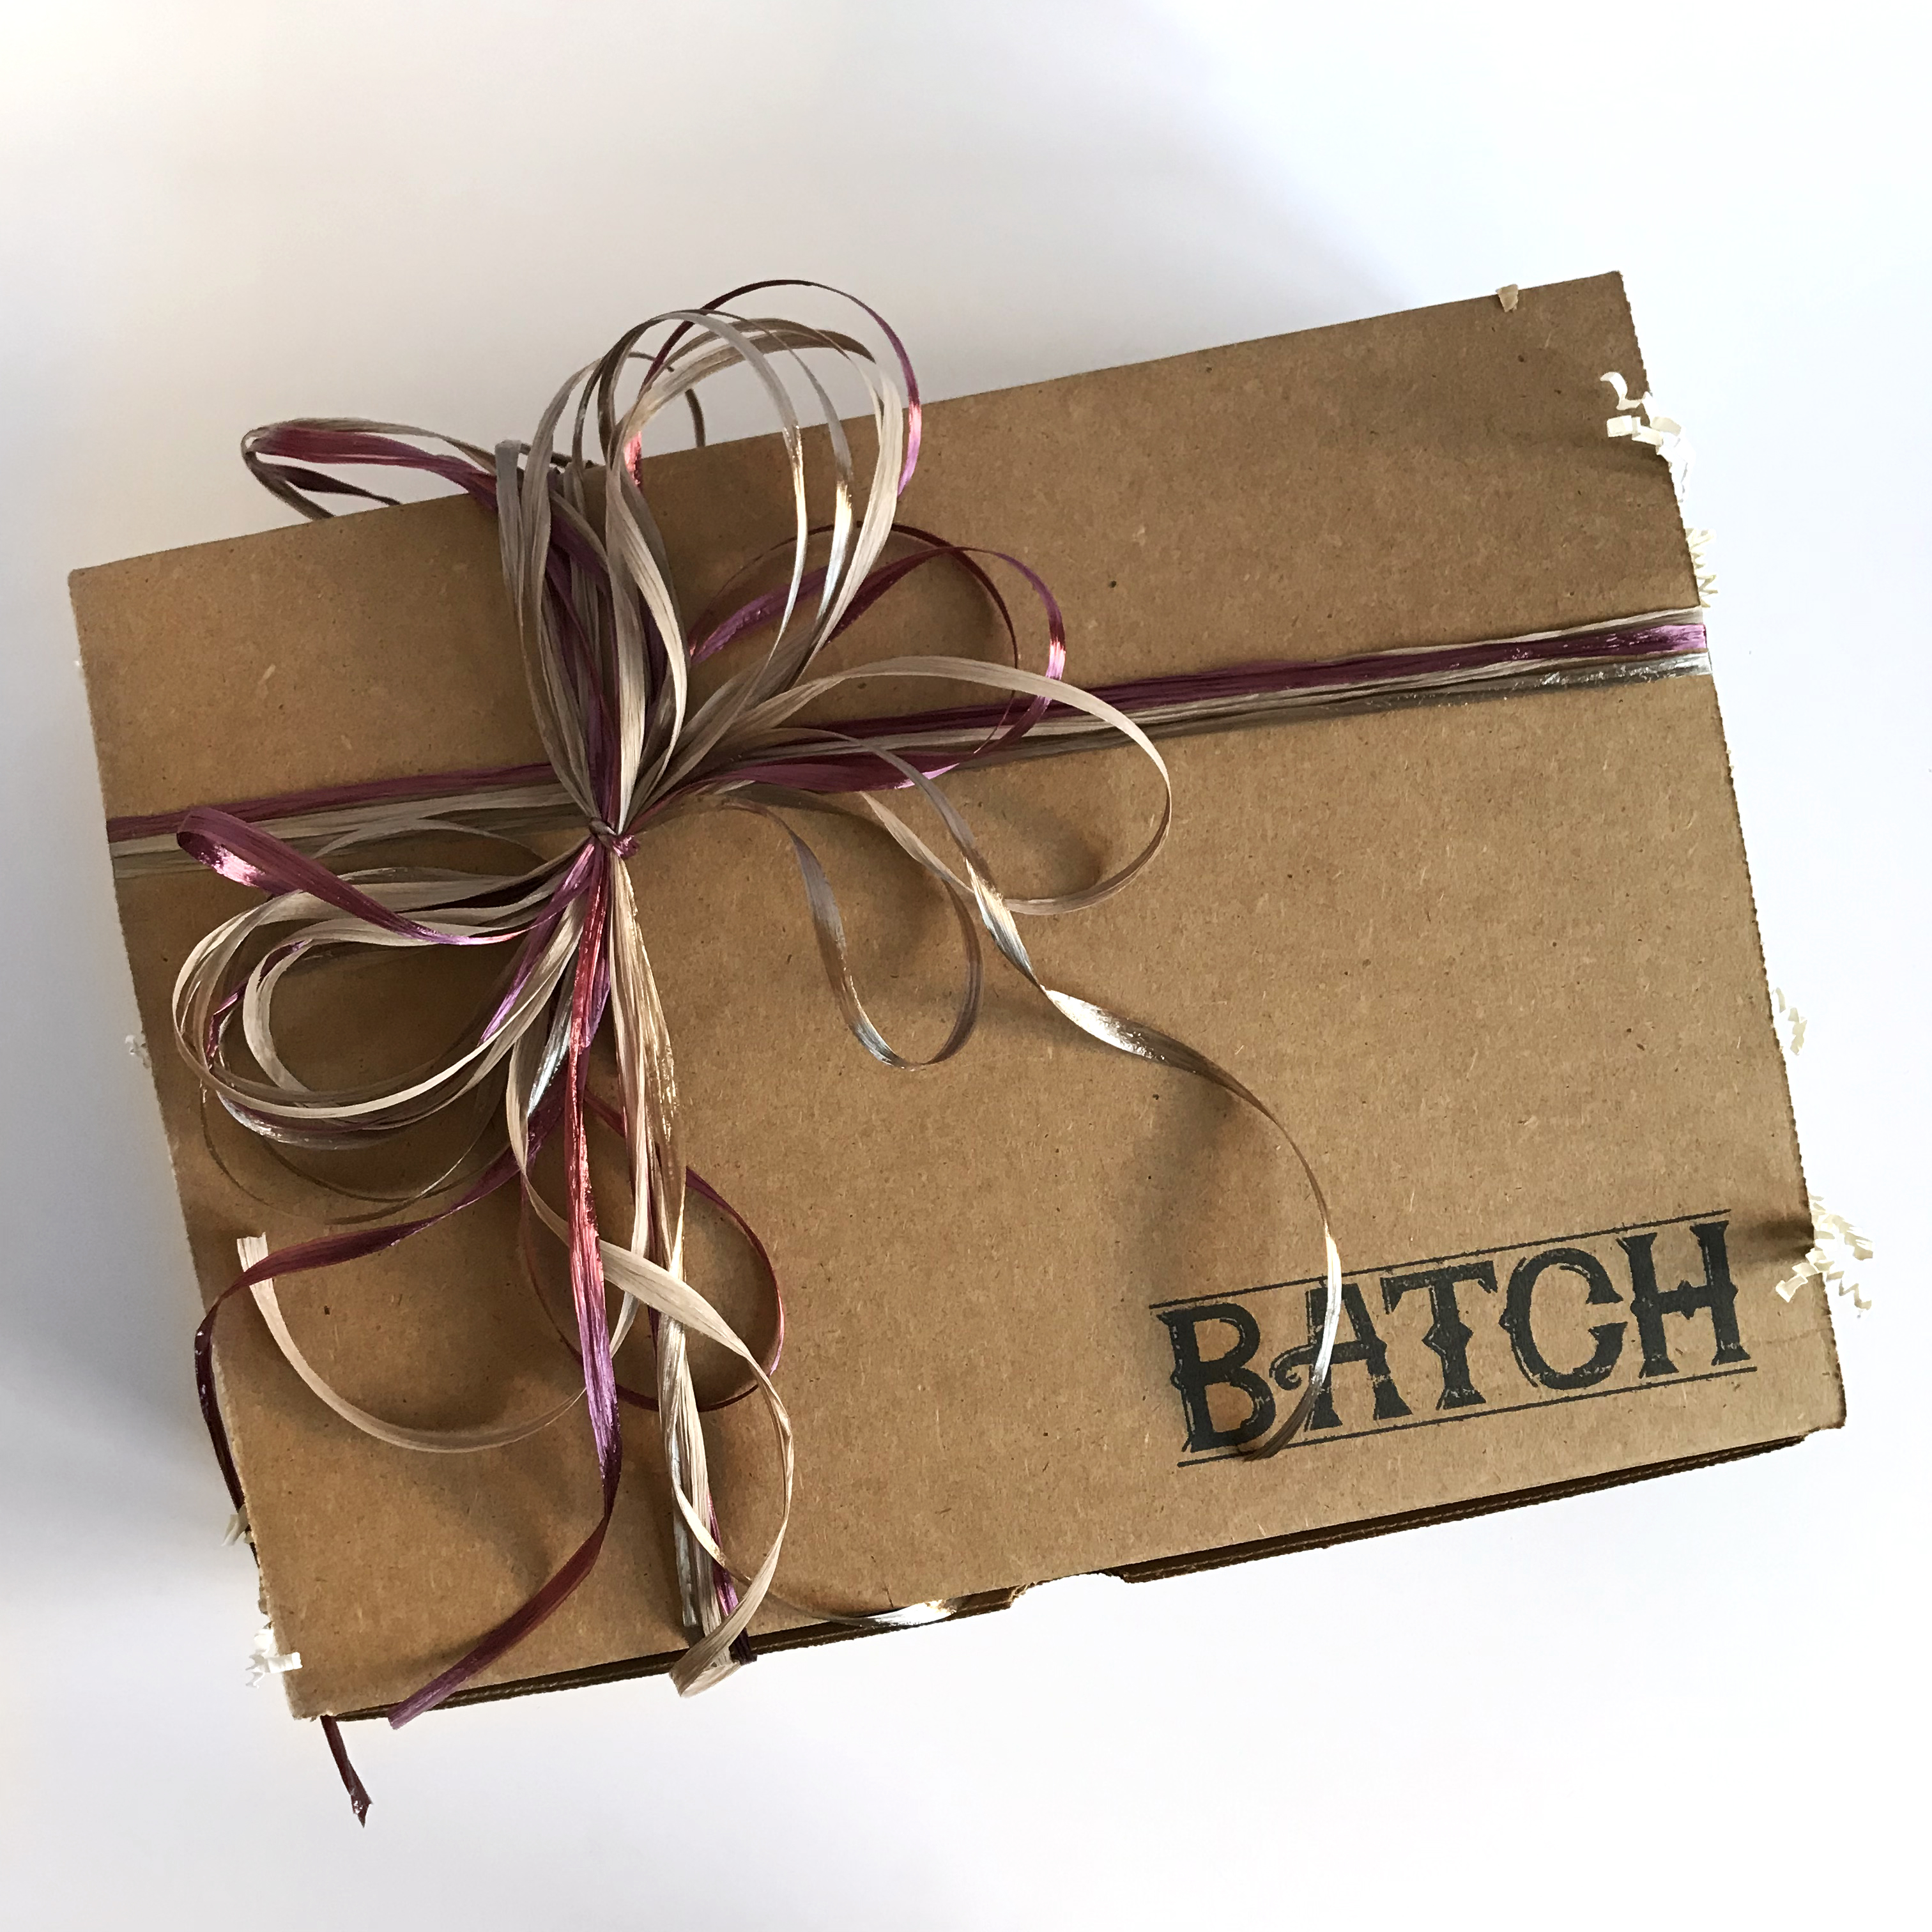 Batch Women’s Deluxe Subscription Discovery Box Review + Coupon – November 2017